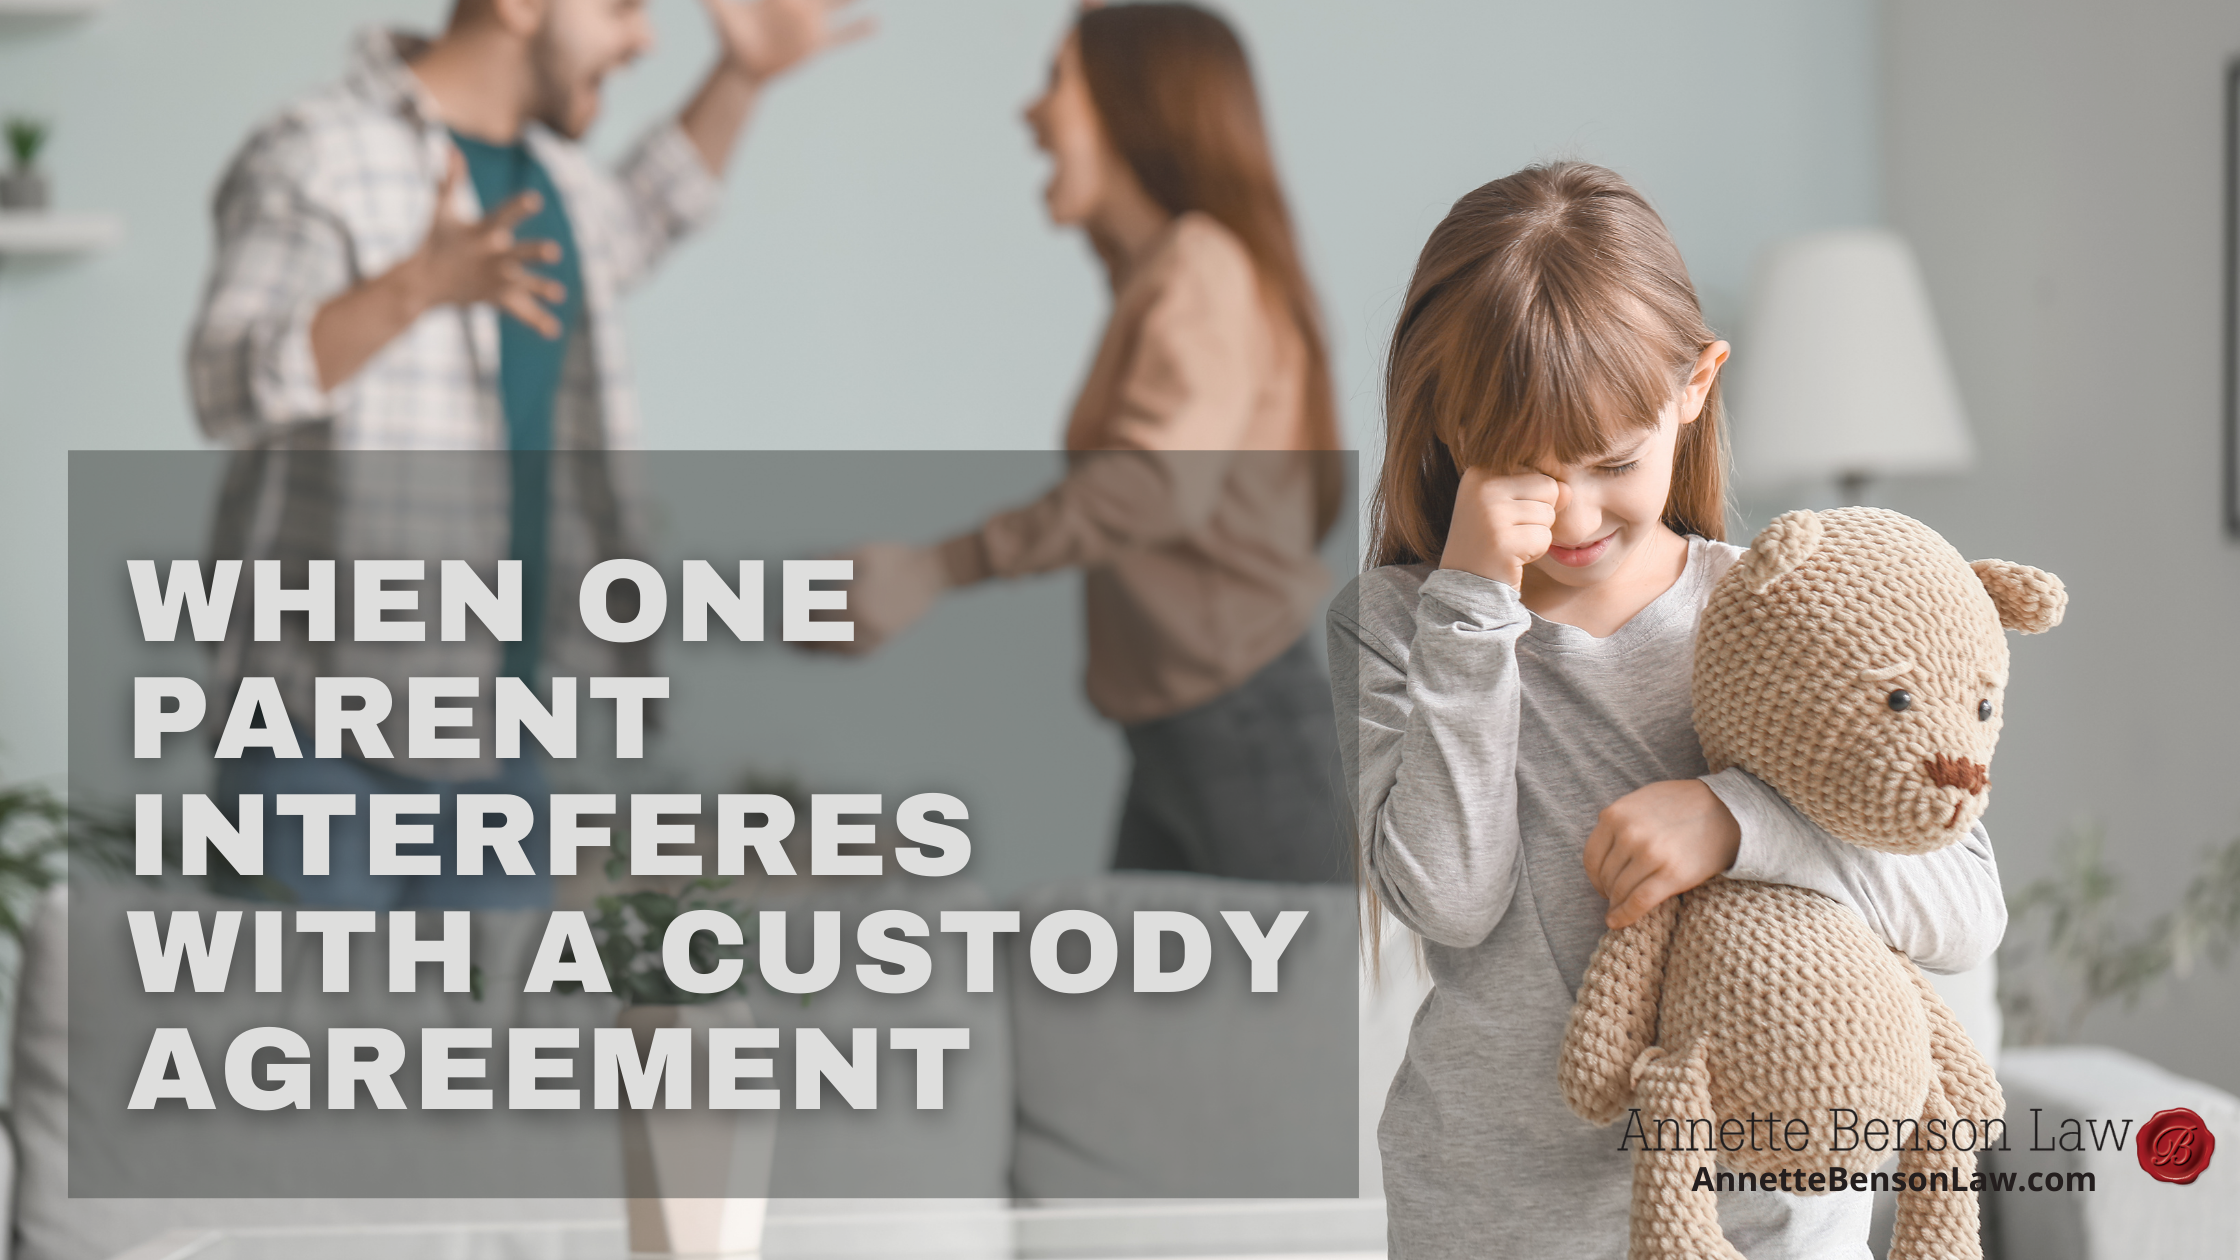 When one parent interferes with a custody agreement